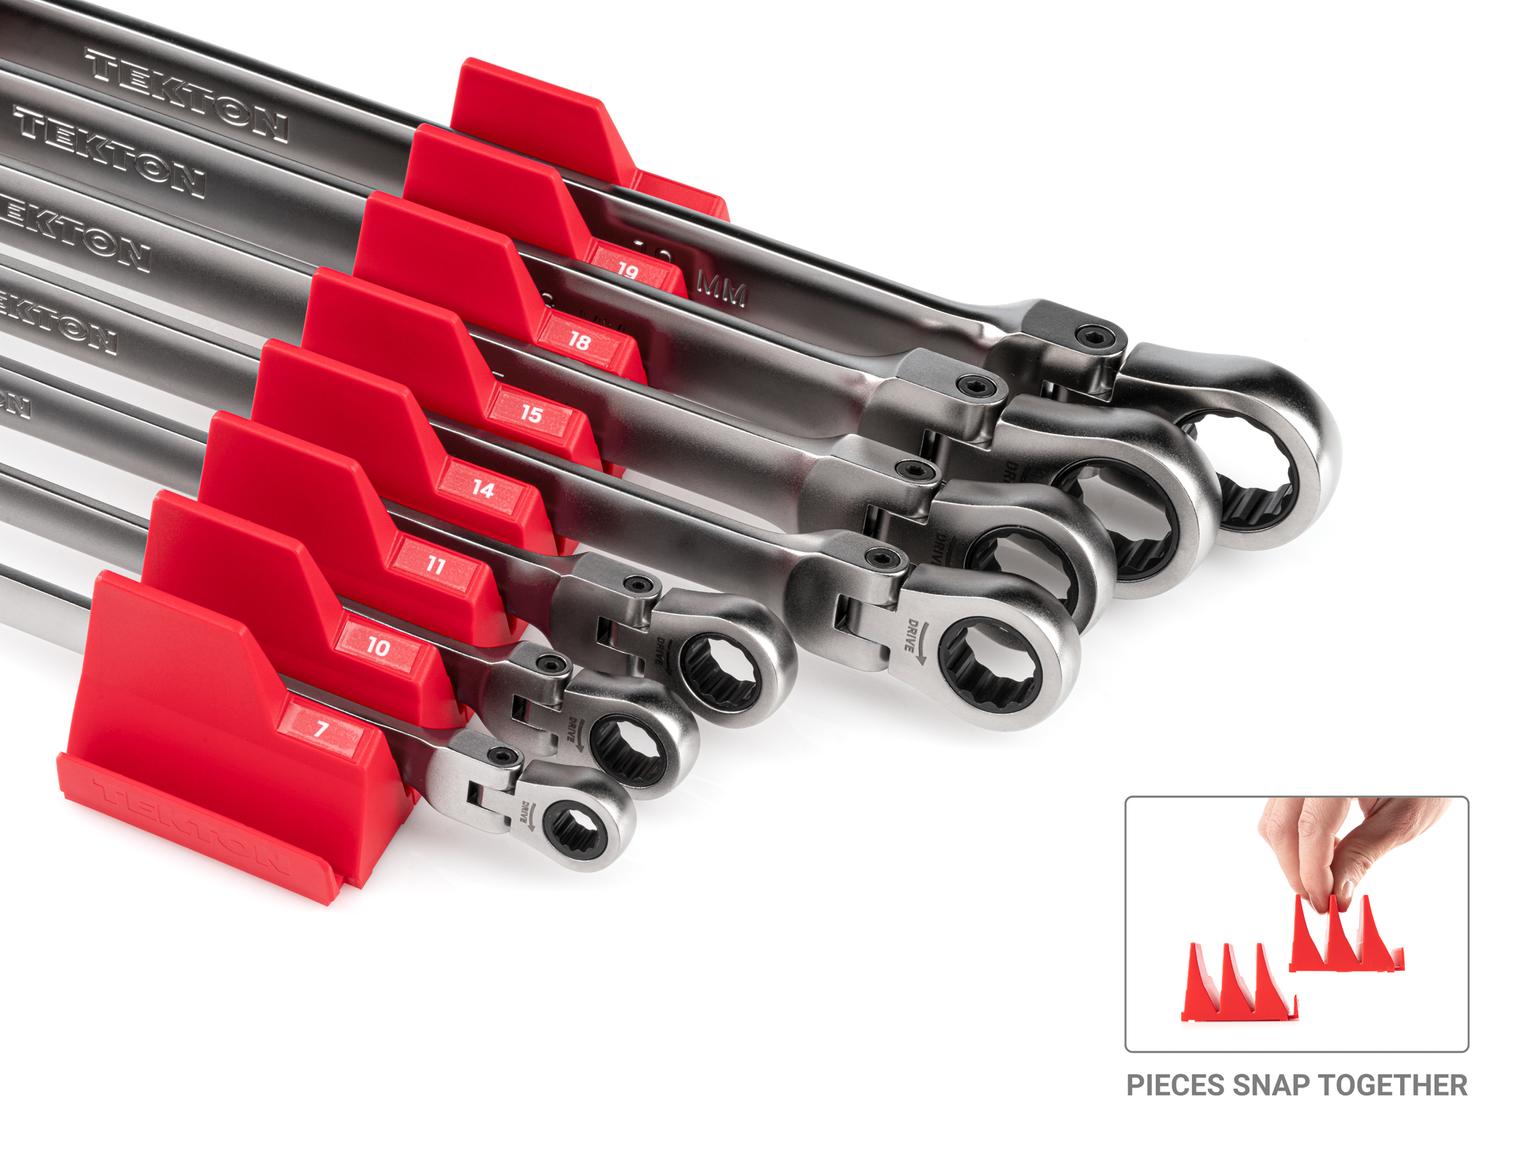 TEKTON WRB96302-T Long Flex Head 12-Point Ratcheting Box End Wrench Set with Modular Slotted Organizer, 13-Piece (1/4-13/16 in., 6-19 mm)